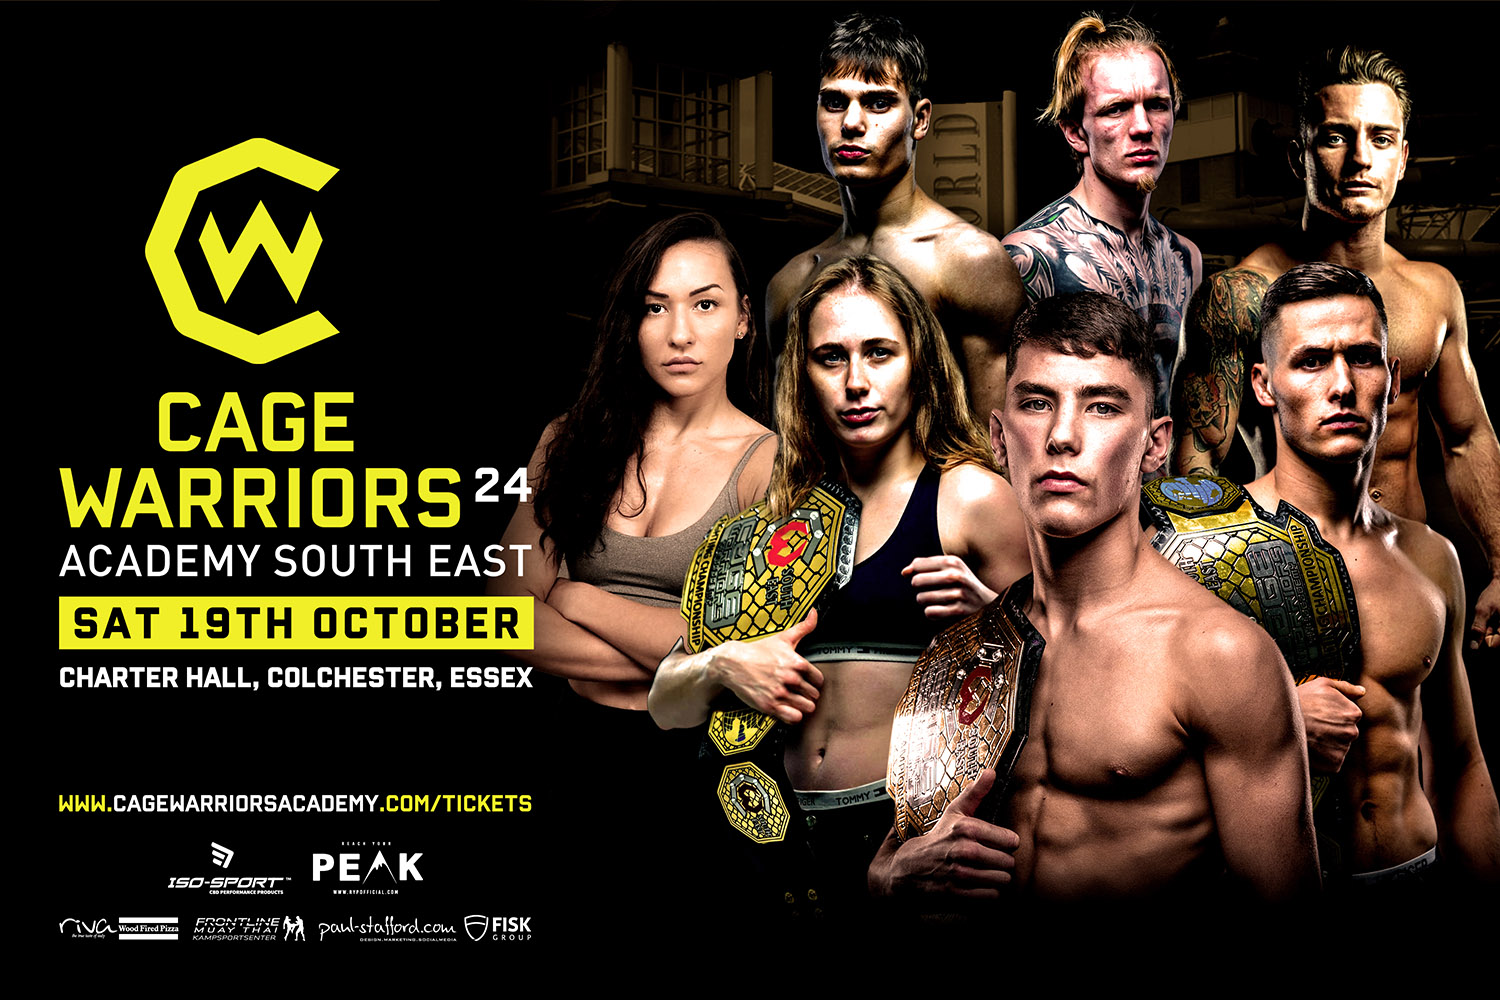 cage-warriors-academy-south-east-24-looks-sensational-cage-warriors